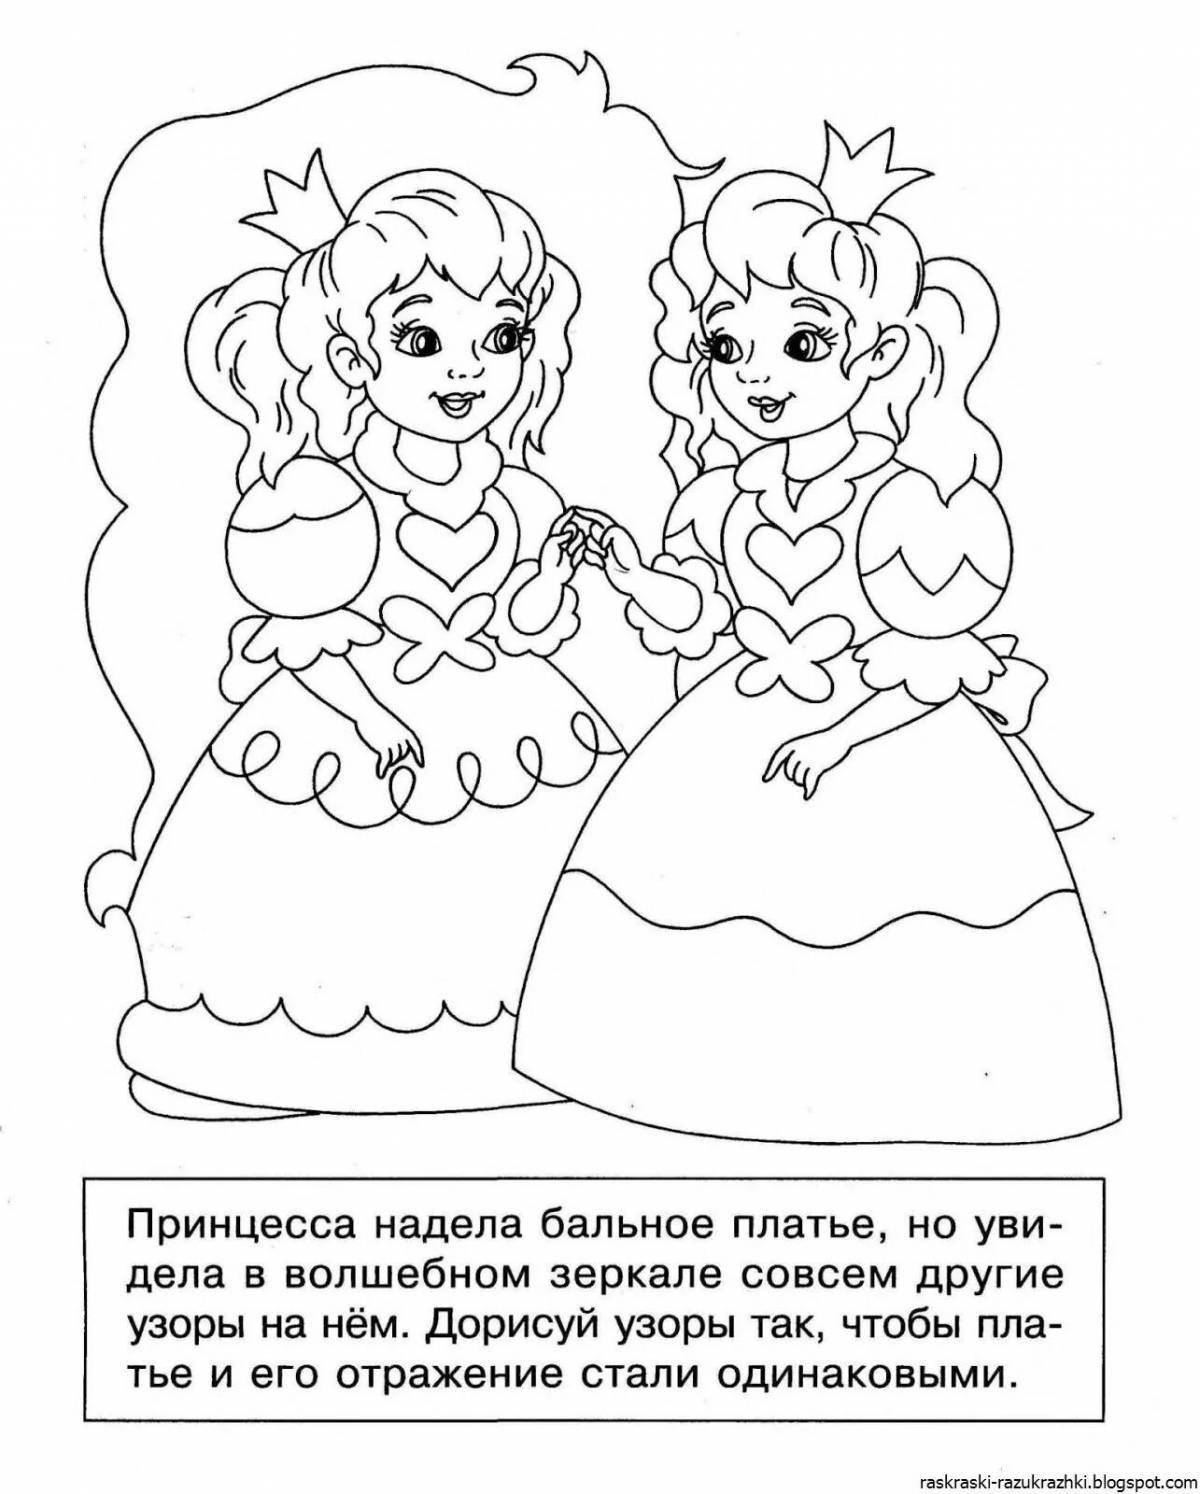 Color-fun coloring page educational page for girls 7 years old